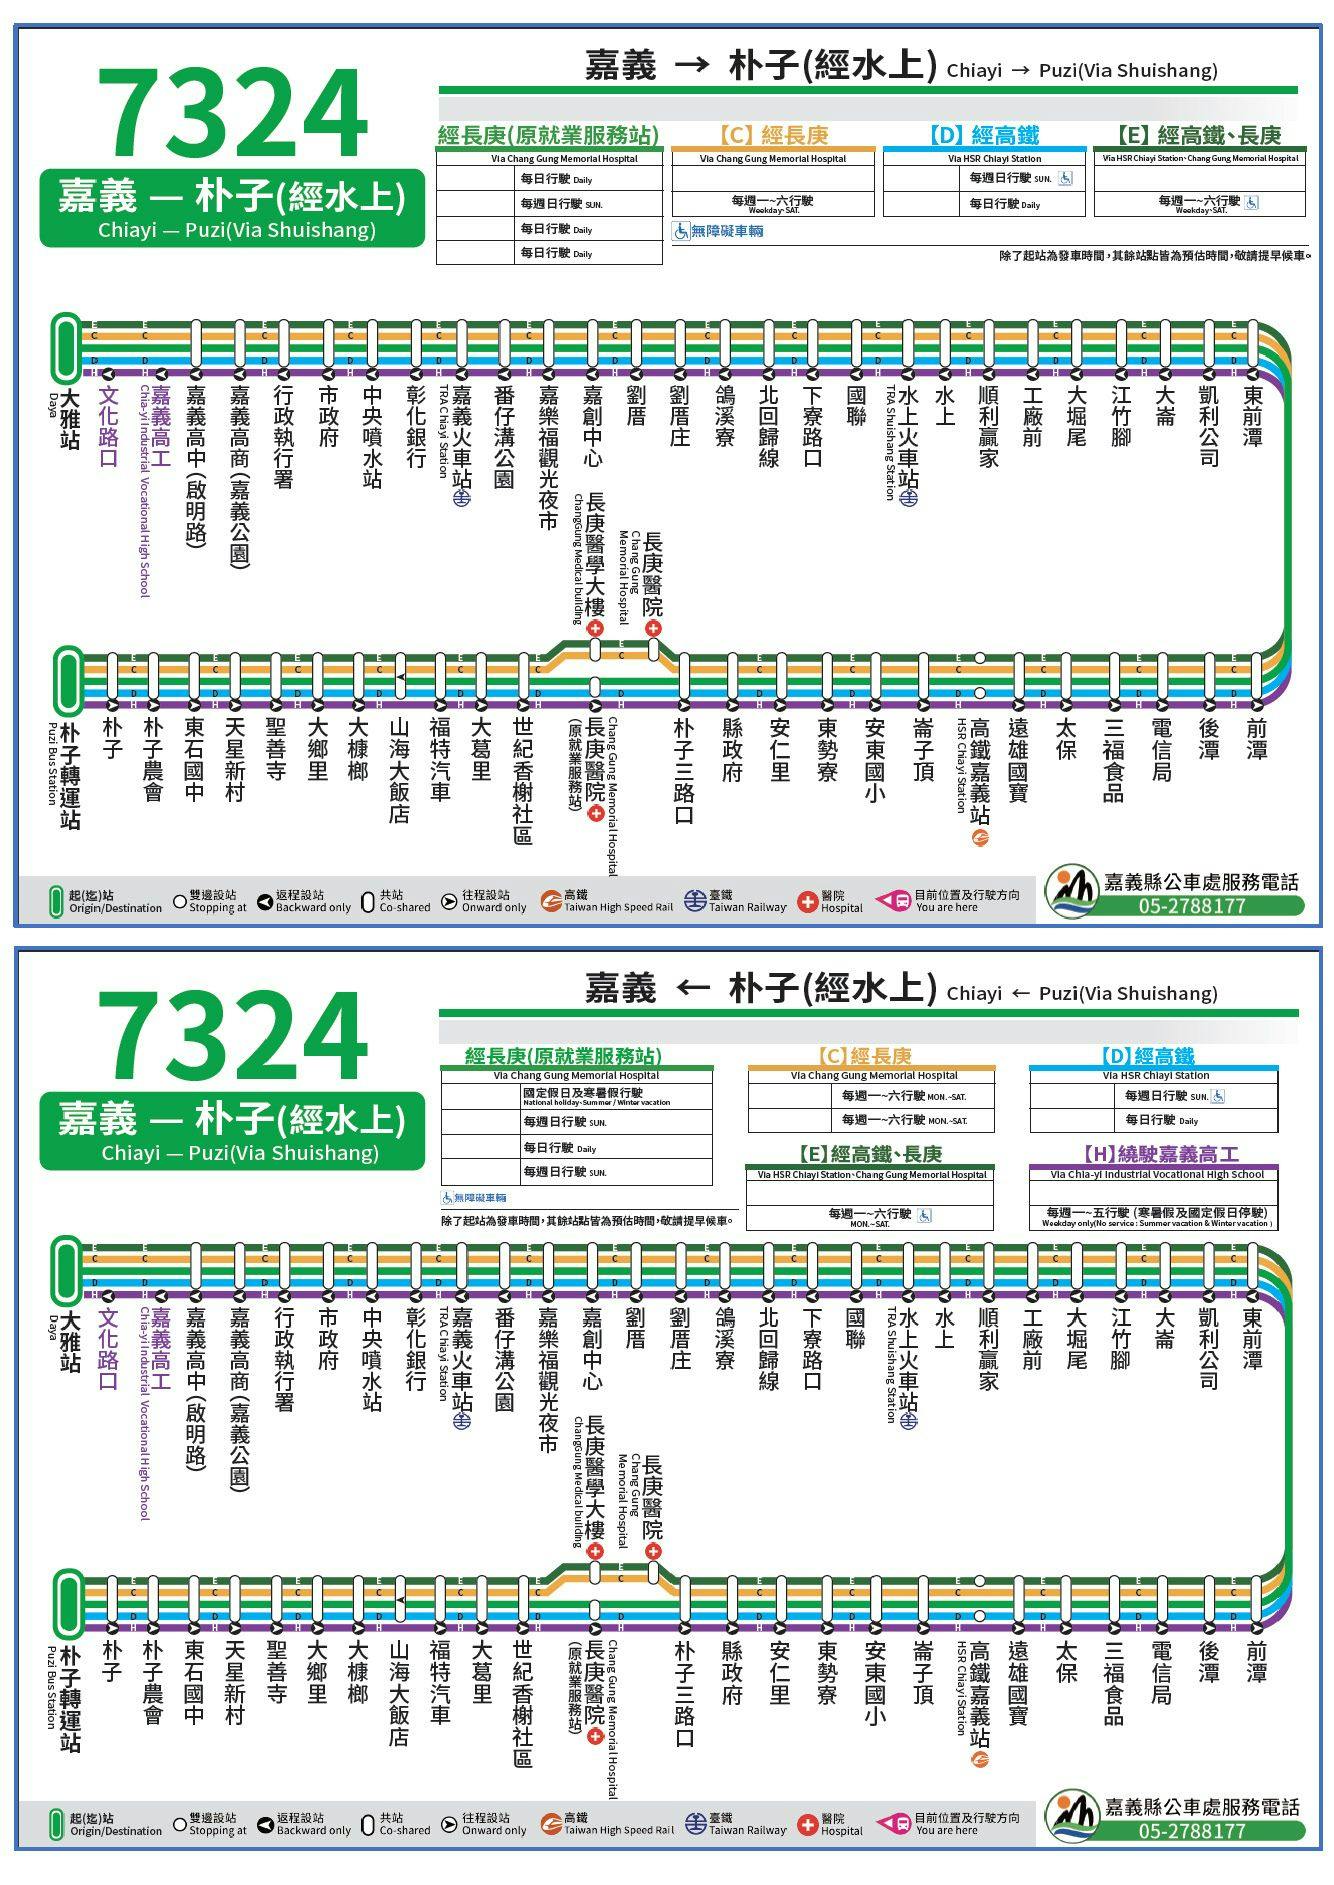 7324Route Map-Chiayi County Bus Service Administration